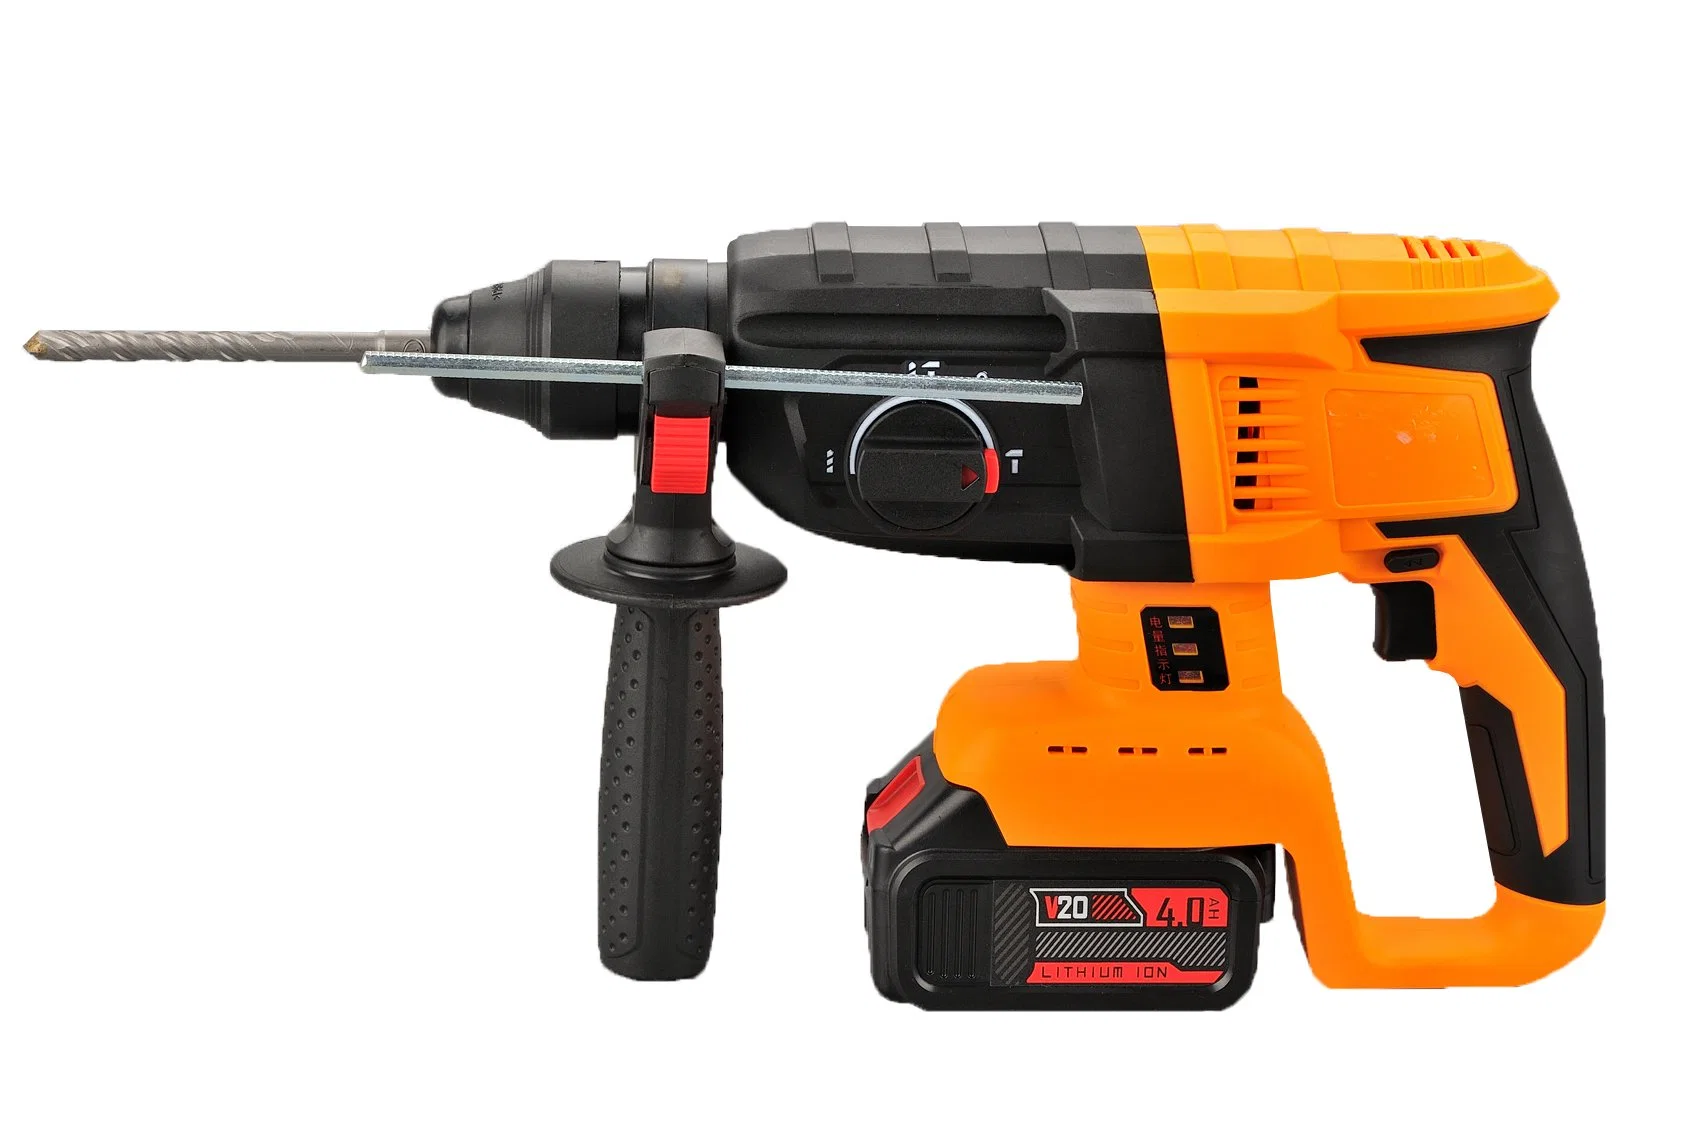 Youwe Factory Electric Rotary Hammer Drill Max Drill Rotary Hammer